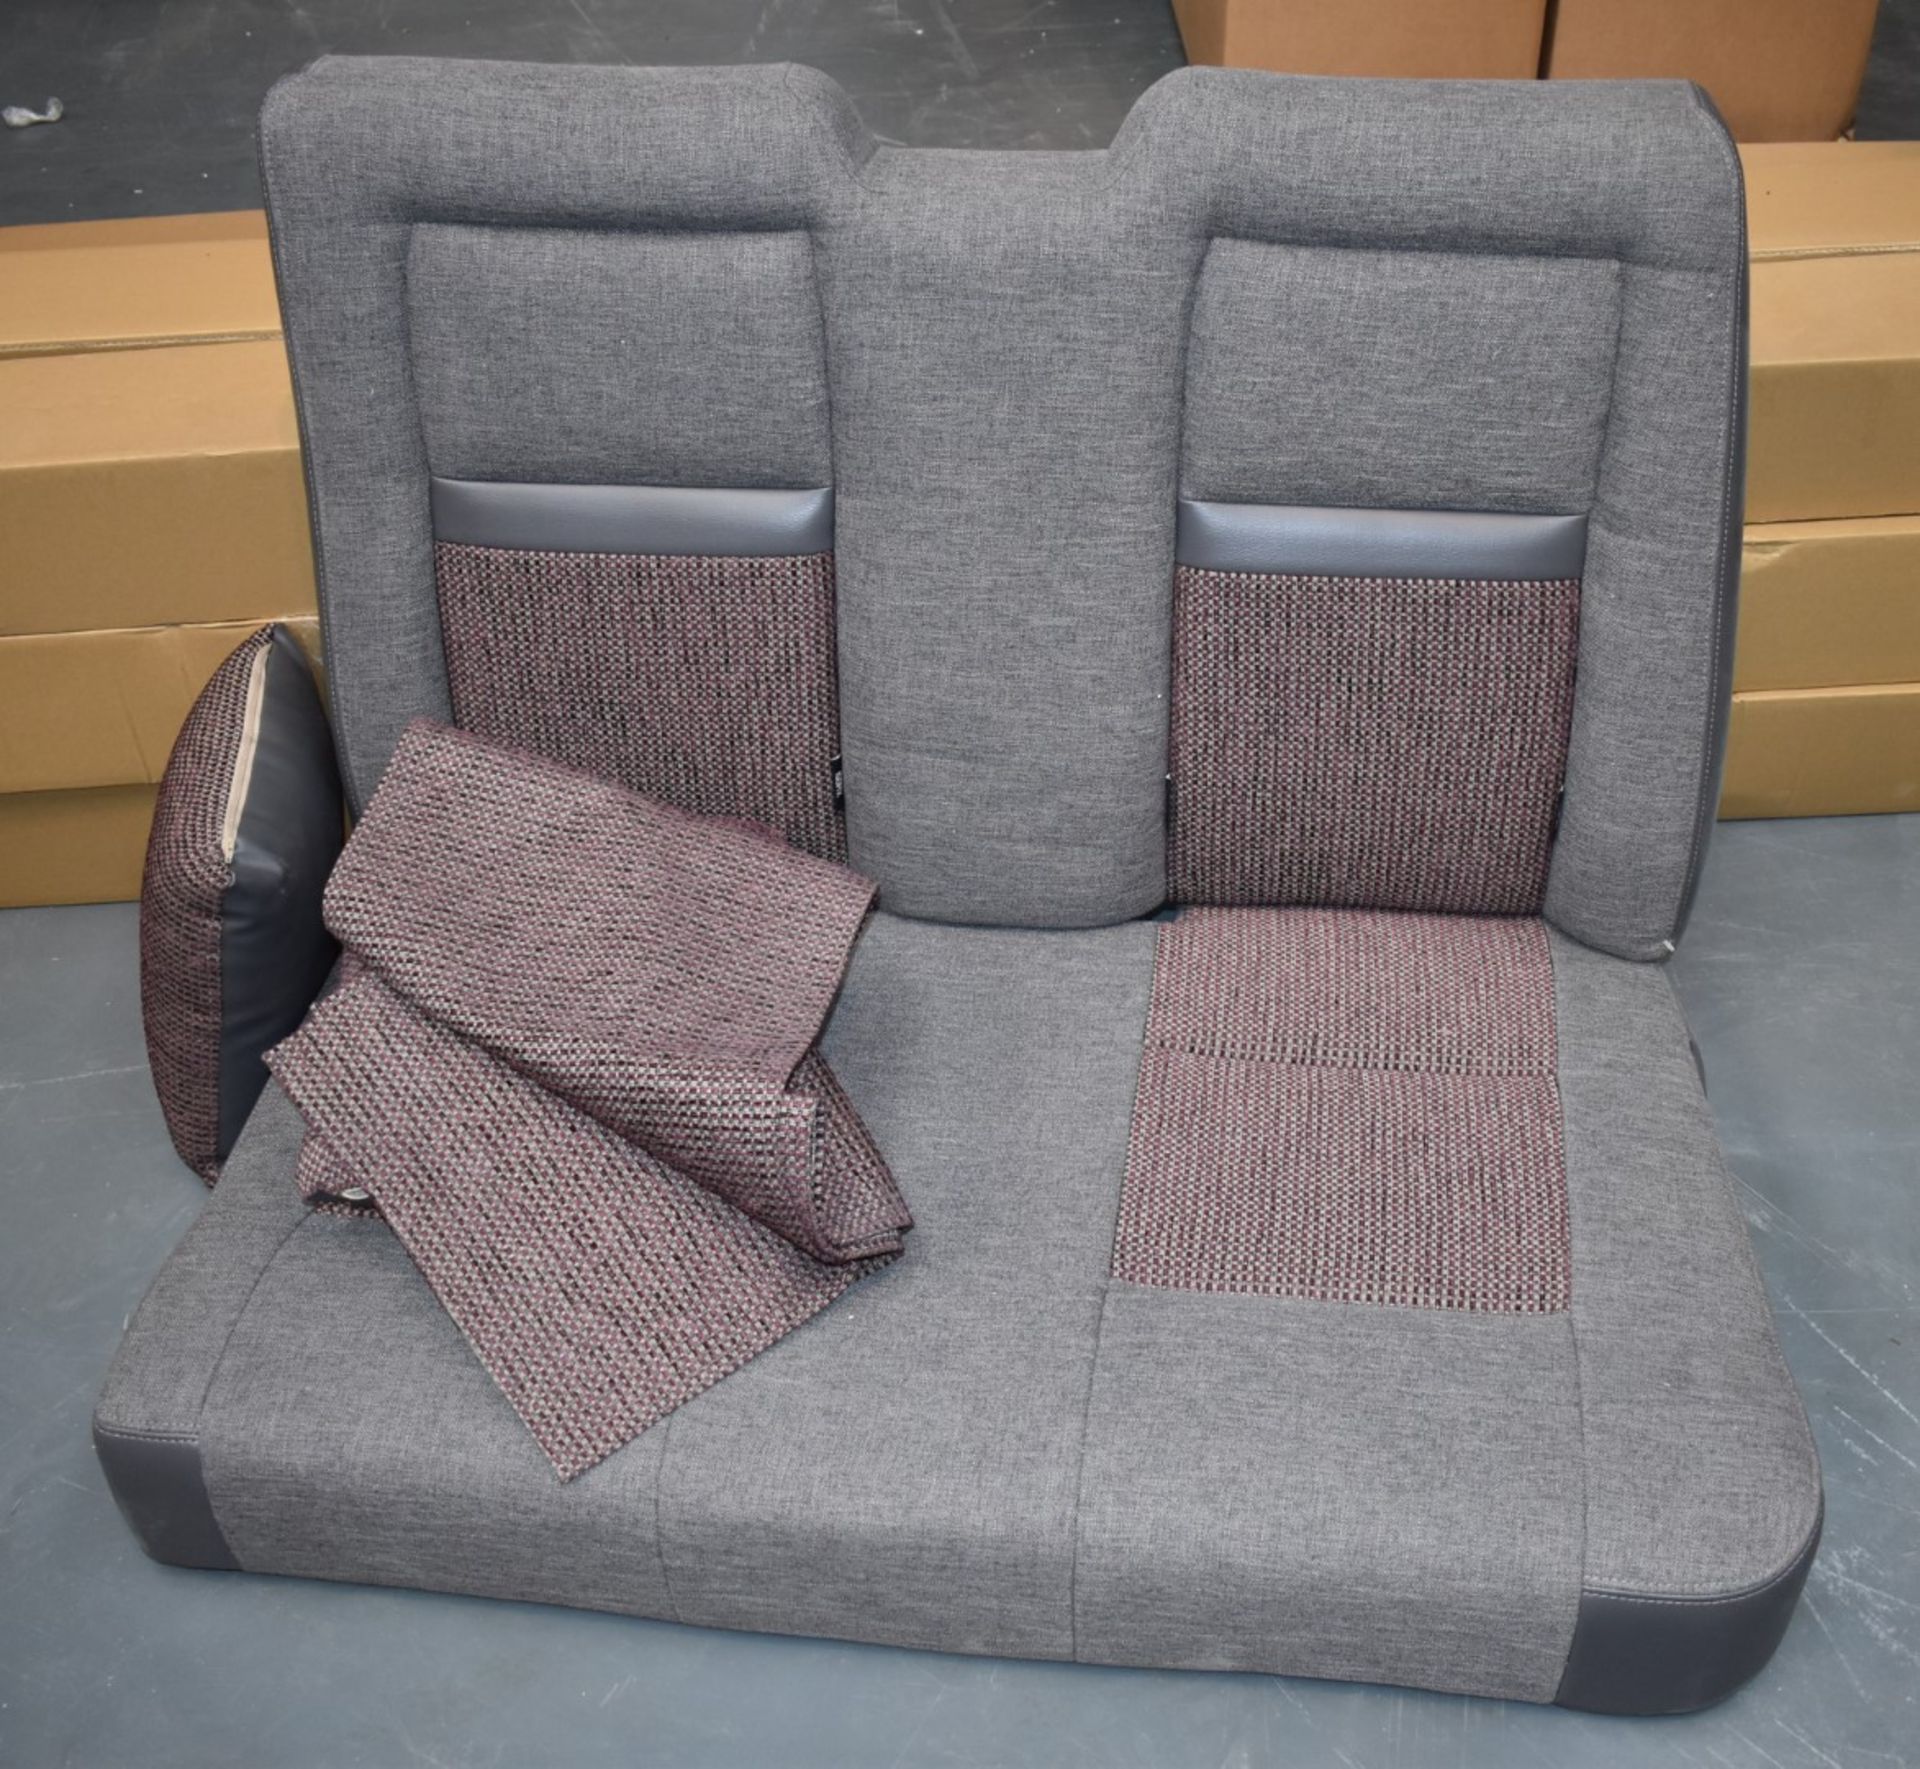 1 x Set of Rear Van Seats With Frame, Seatbelts, Headrests, Pillows, Spare Fabric and Fittings -